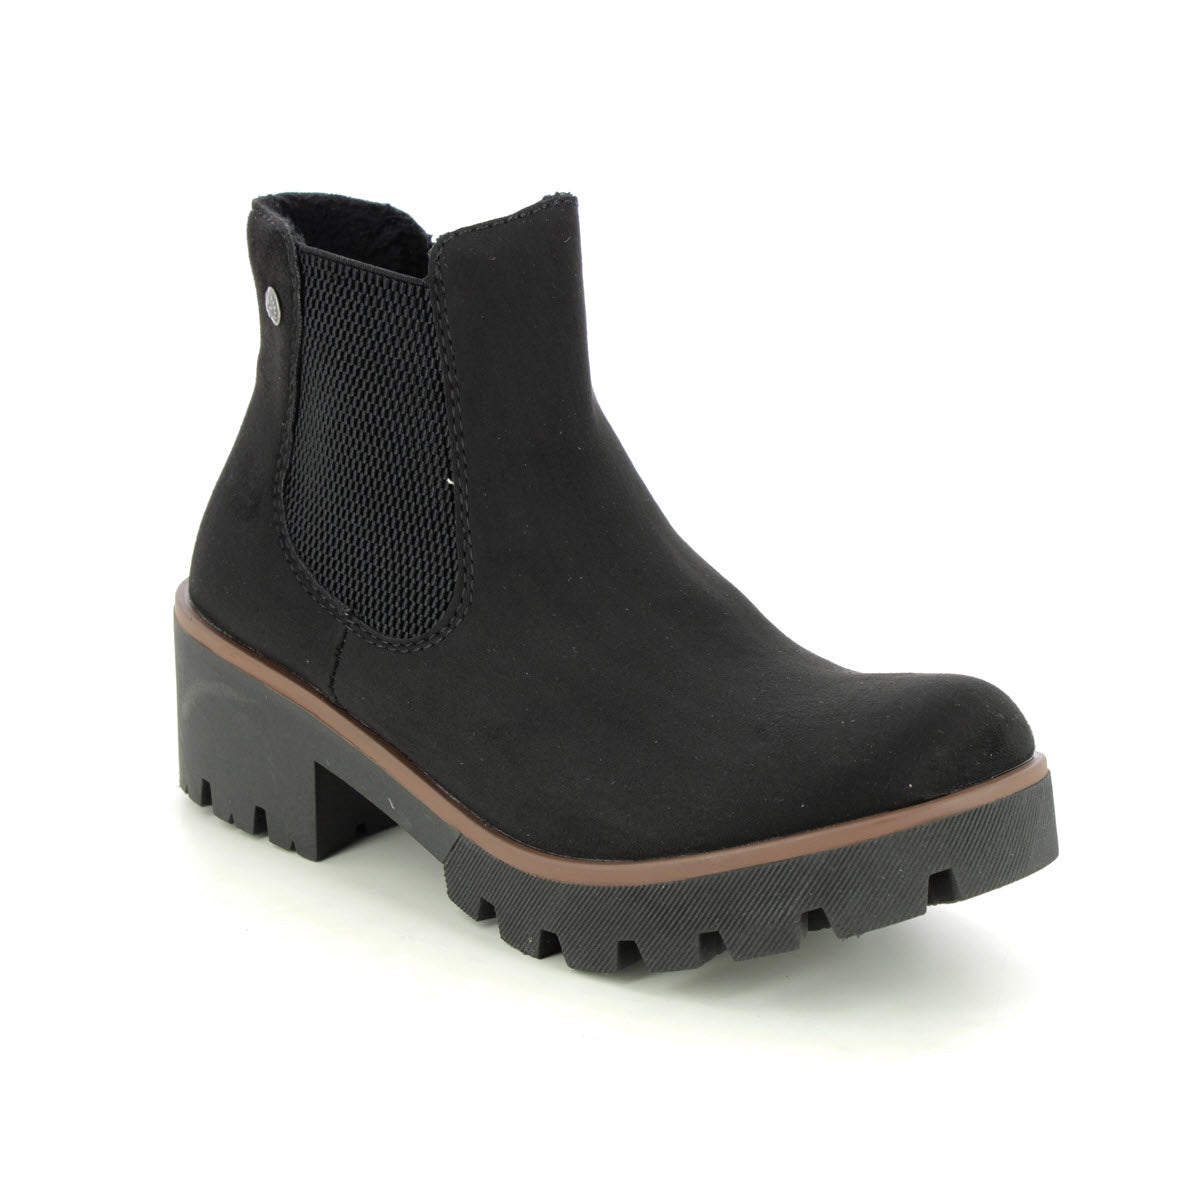 RIEKER CHUNKY HEEL CHELSEA BLACK STRETCH - WOMENS with a chunky sole, brown midsole, and side elastic panel for easy wear. These Chelsea boots from Rieker also feature a soft insole for added comfort.